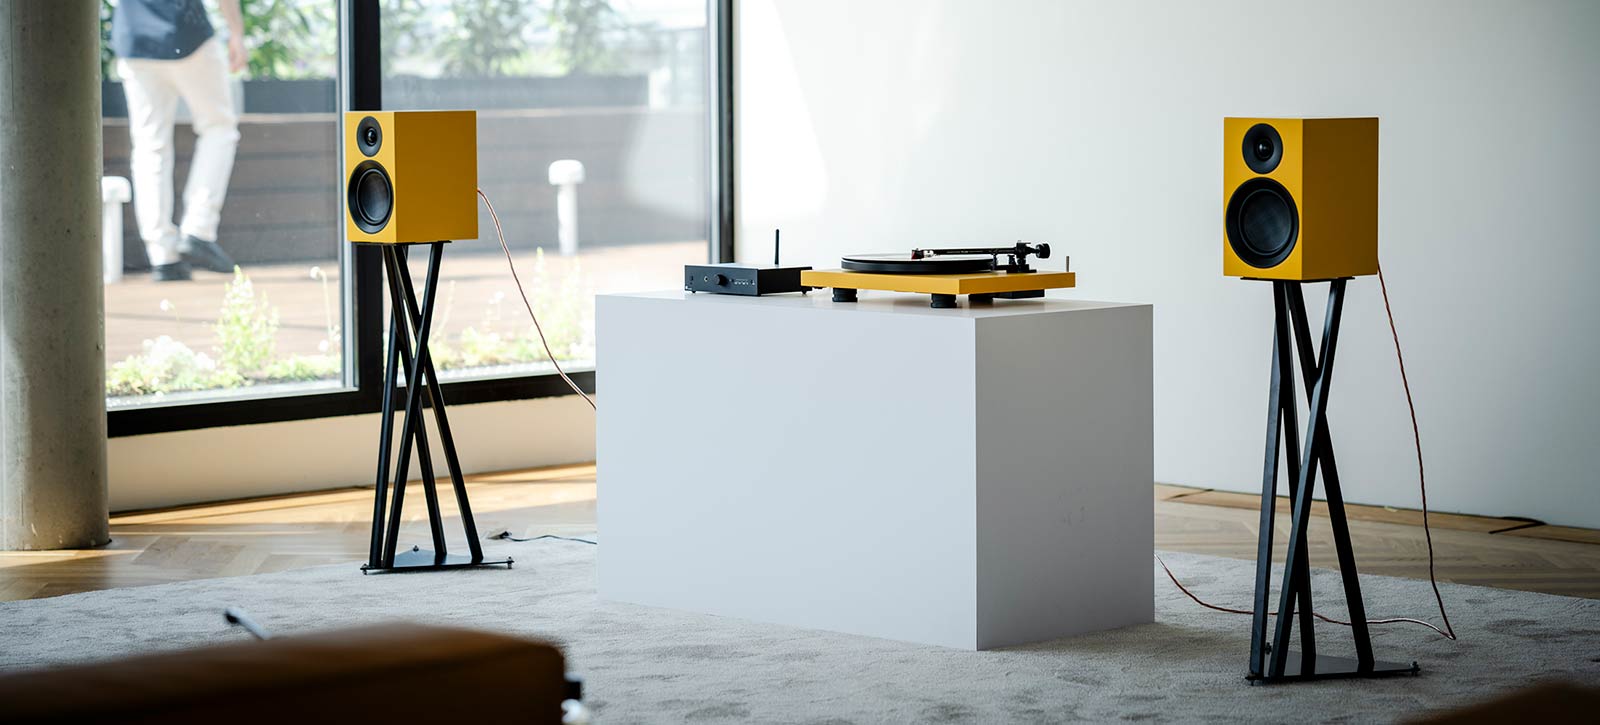 Pro-Ject-Tristands-Lifestyle-Image.jpg